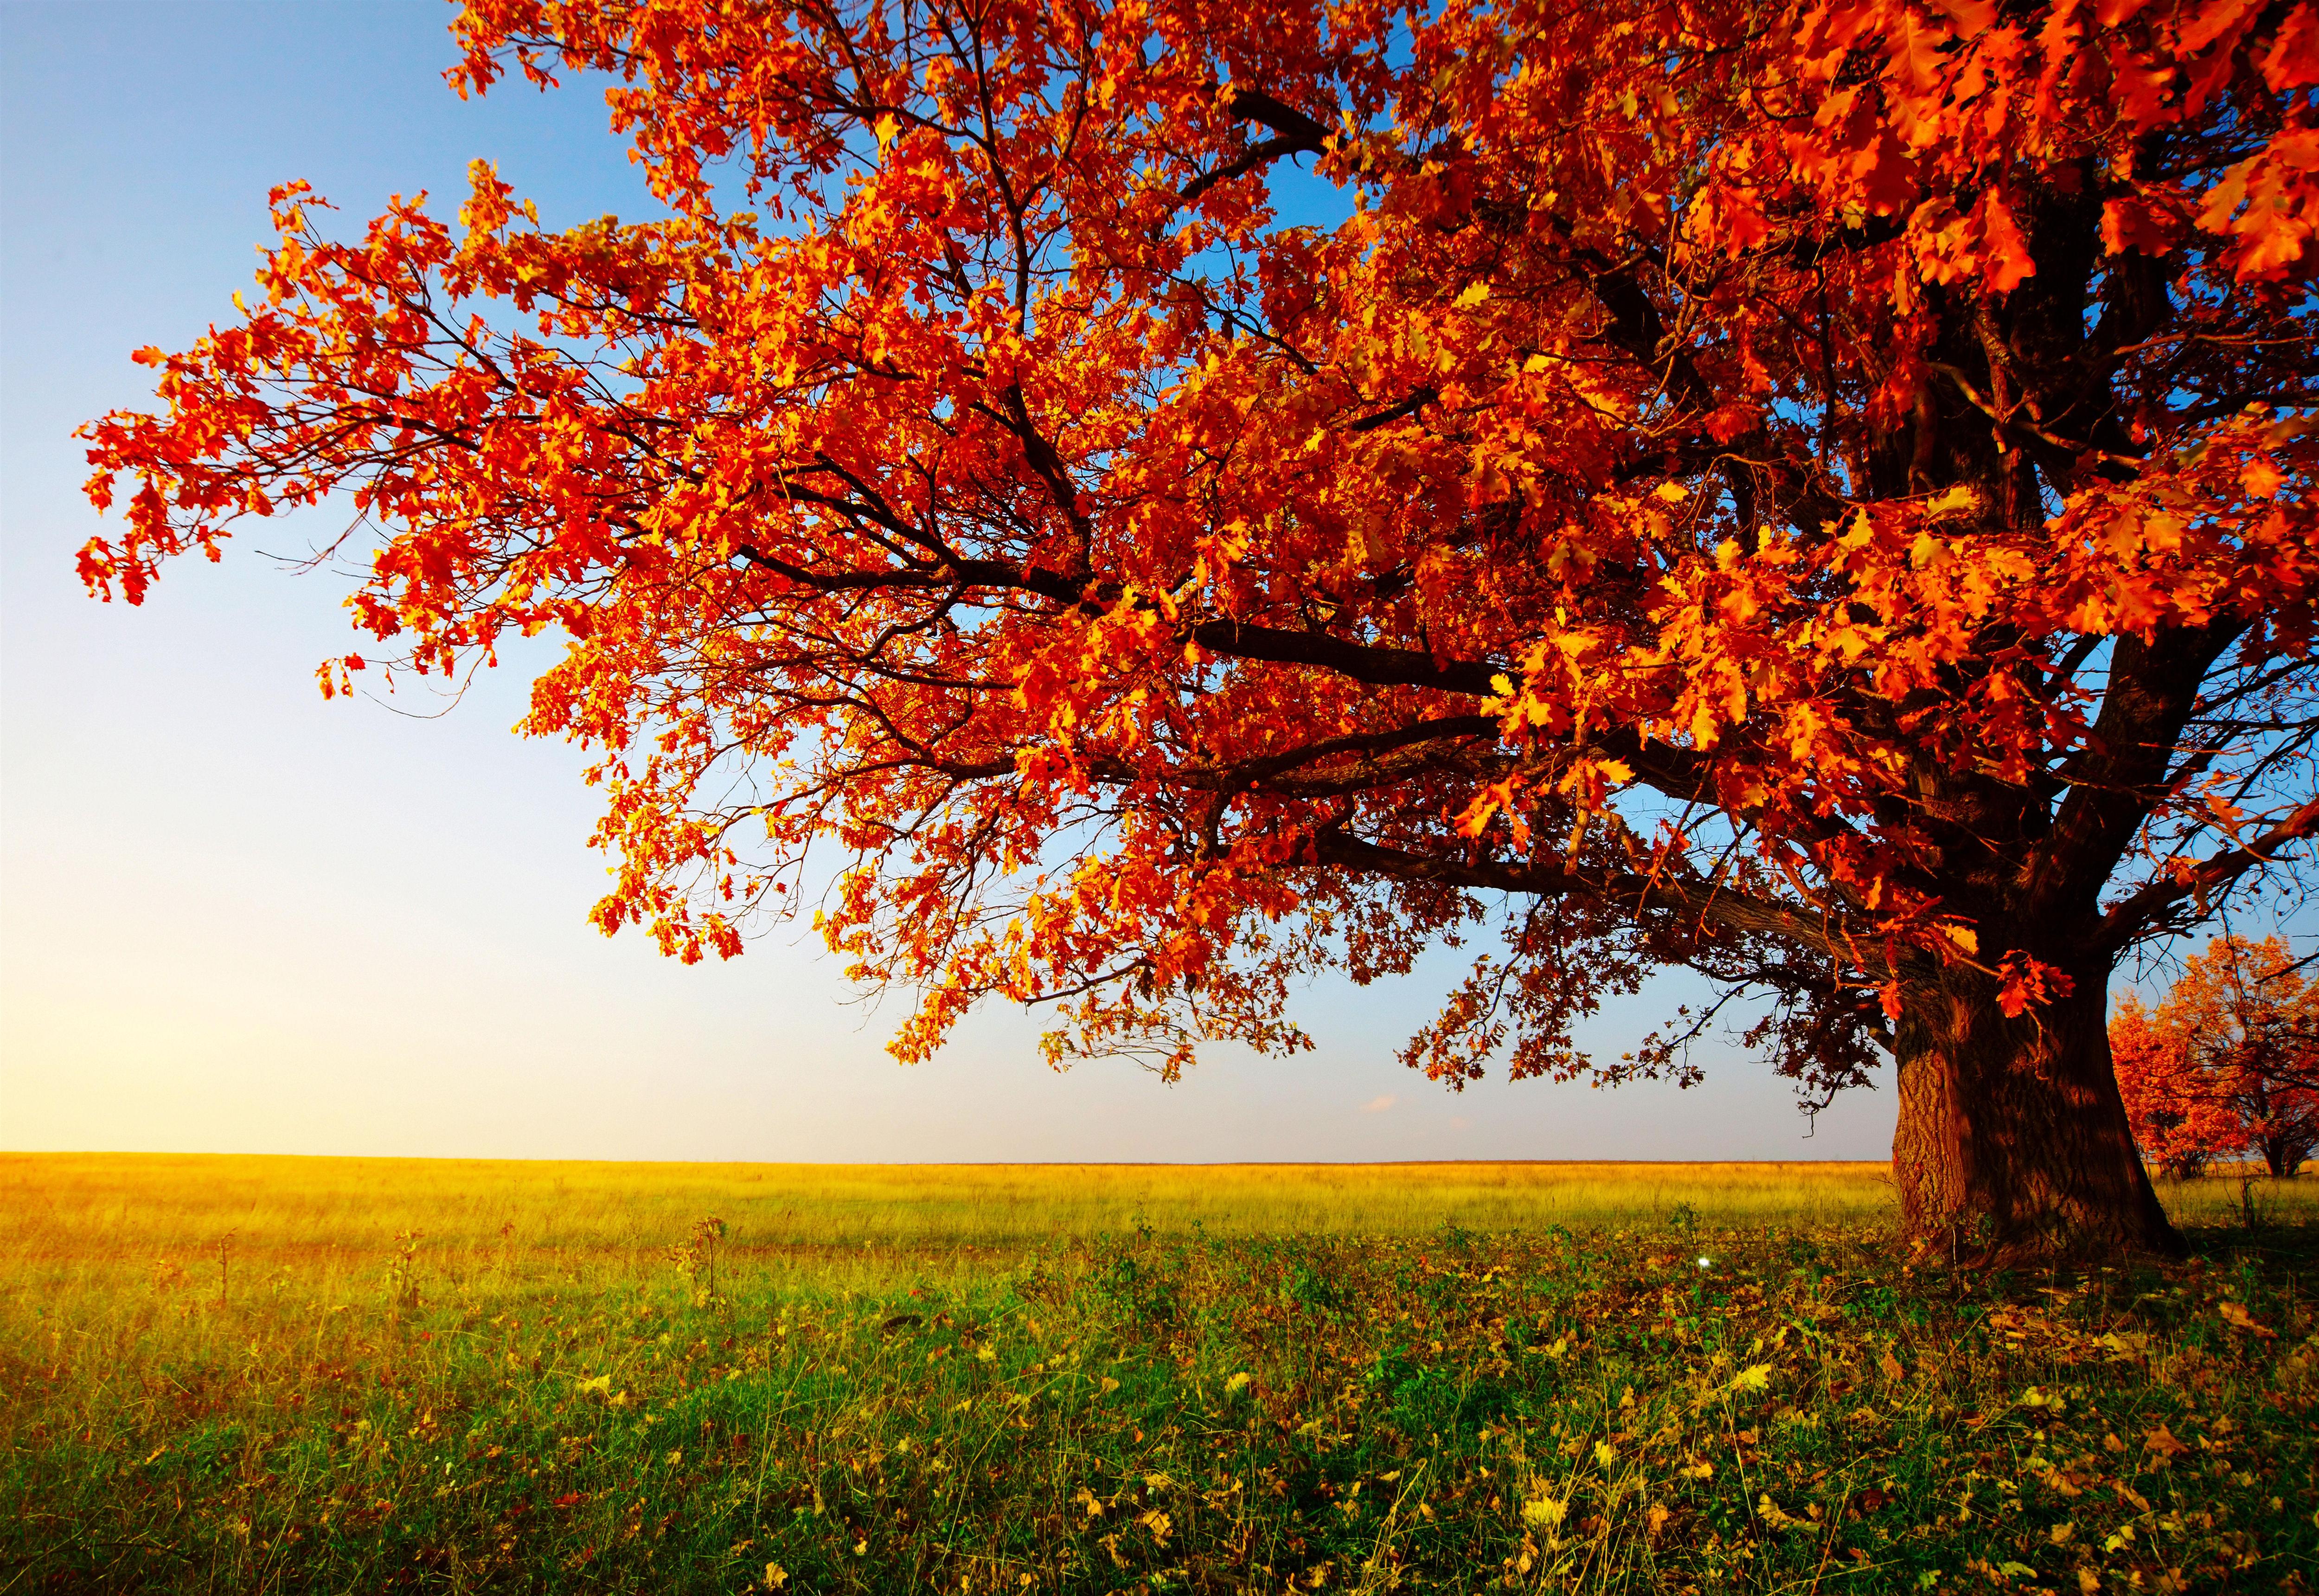 Autumn Desktop Wallpapers - HD Wallpapers Backgrounds of Your Choice